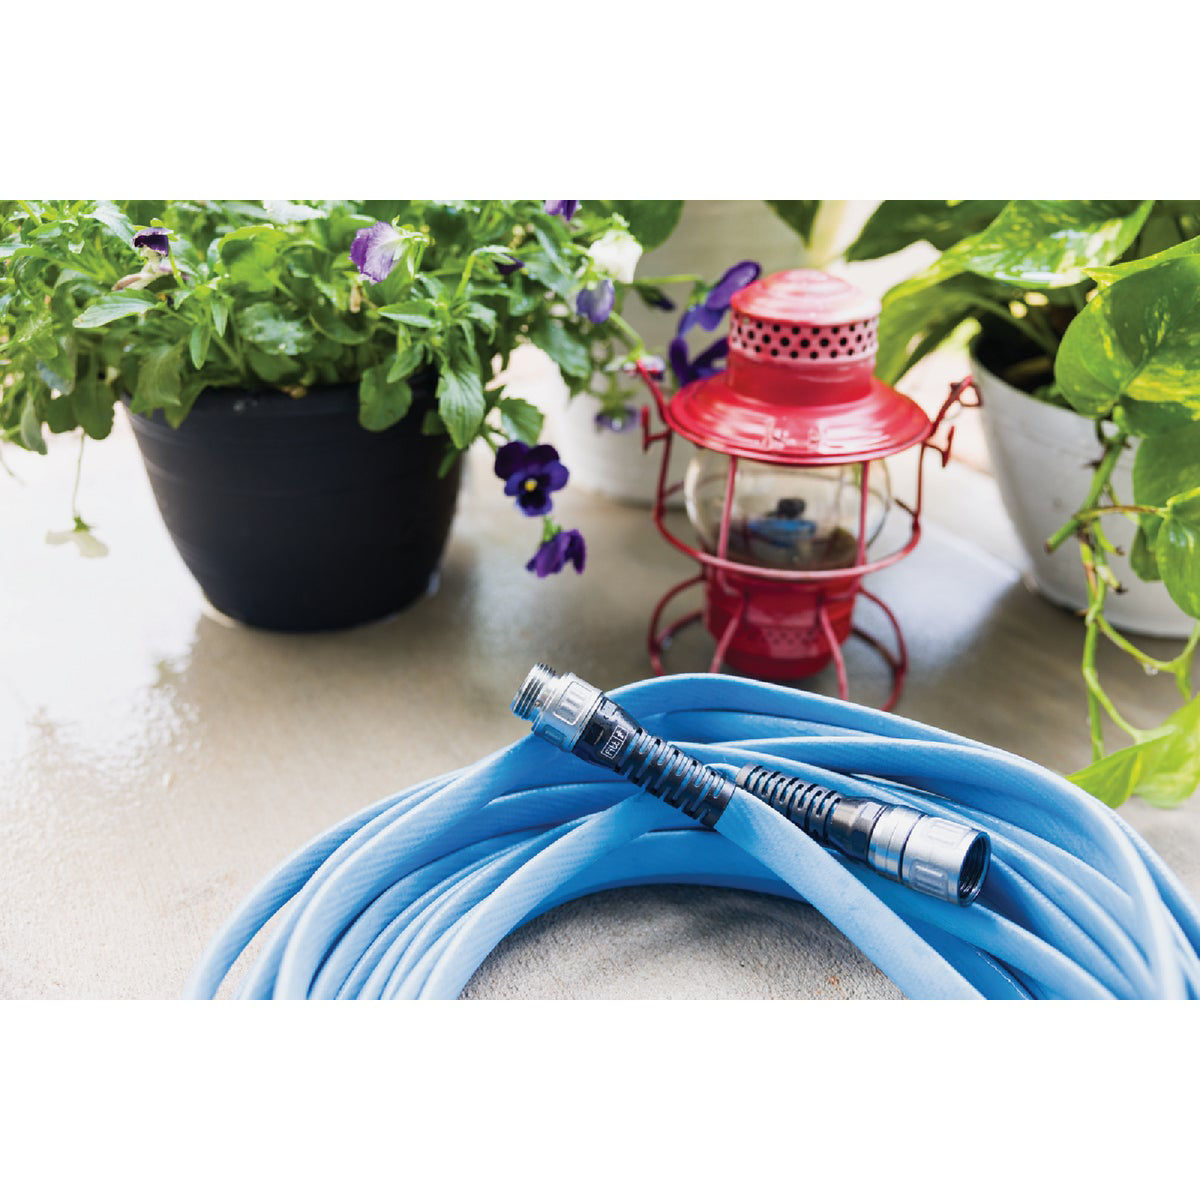 100FT RV Water Hose,5/8” Drinking Water Hose Lead-free, 3/4 Solid Aluminum  Fittings-No Leak,Garden hose Extender/Hose Reel Connector with Adjustable